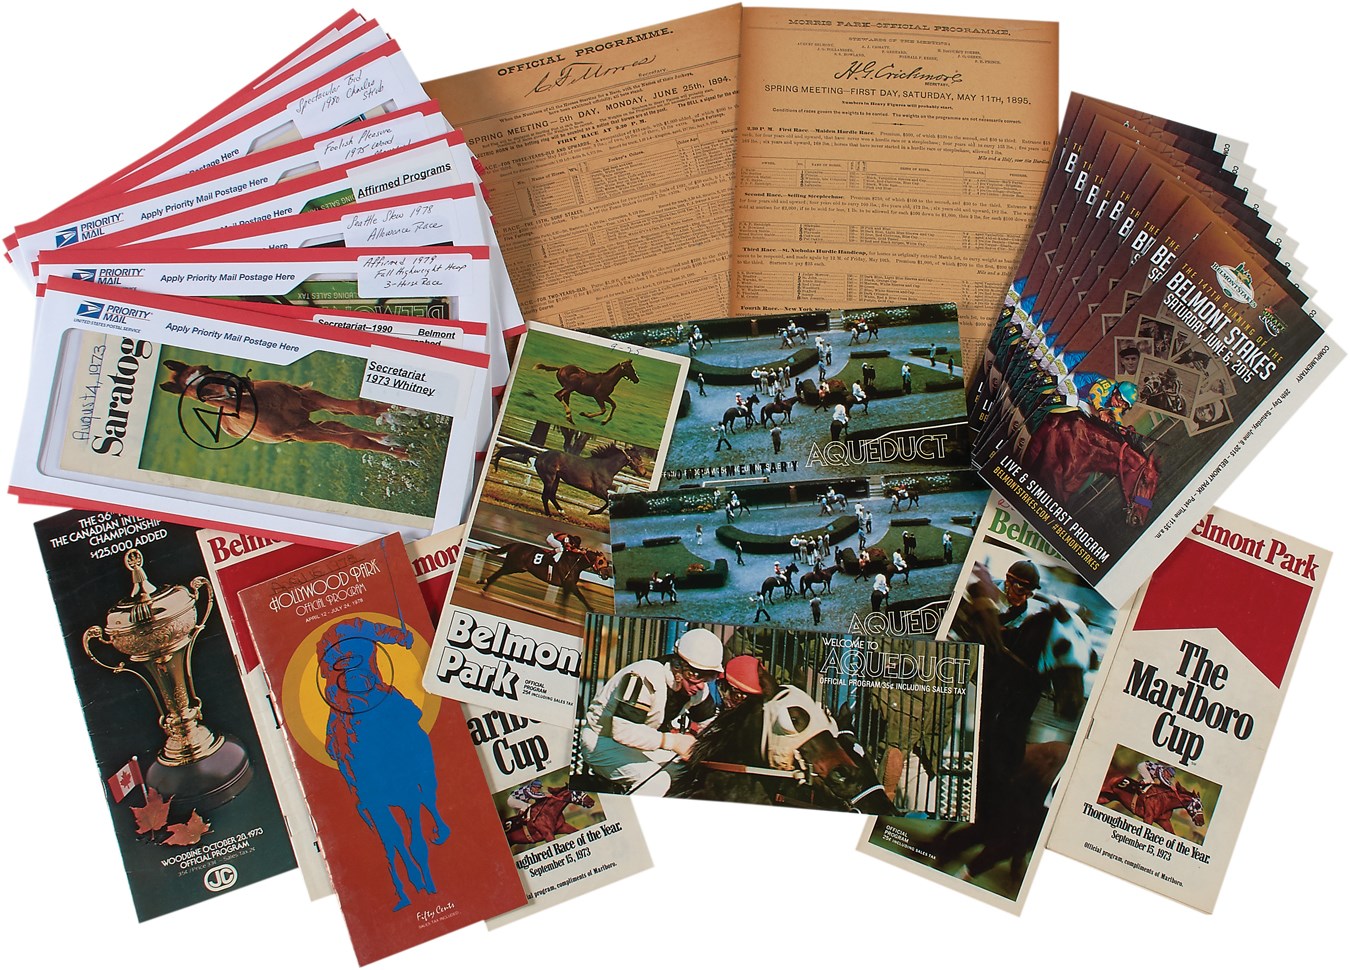 Horse Racing - Important Horse Racing Program Collection - with Seabiscuit, Secretariat, War Admiral (700+)